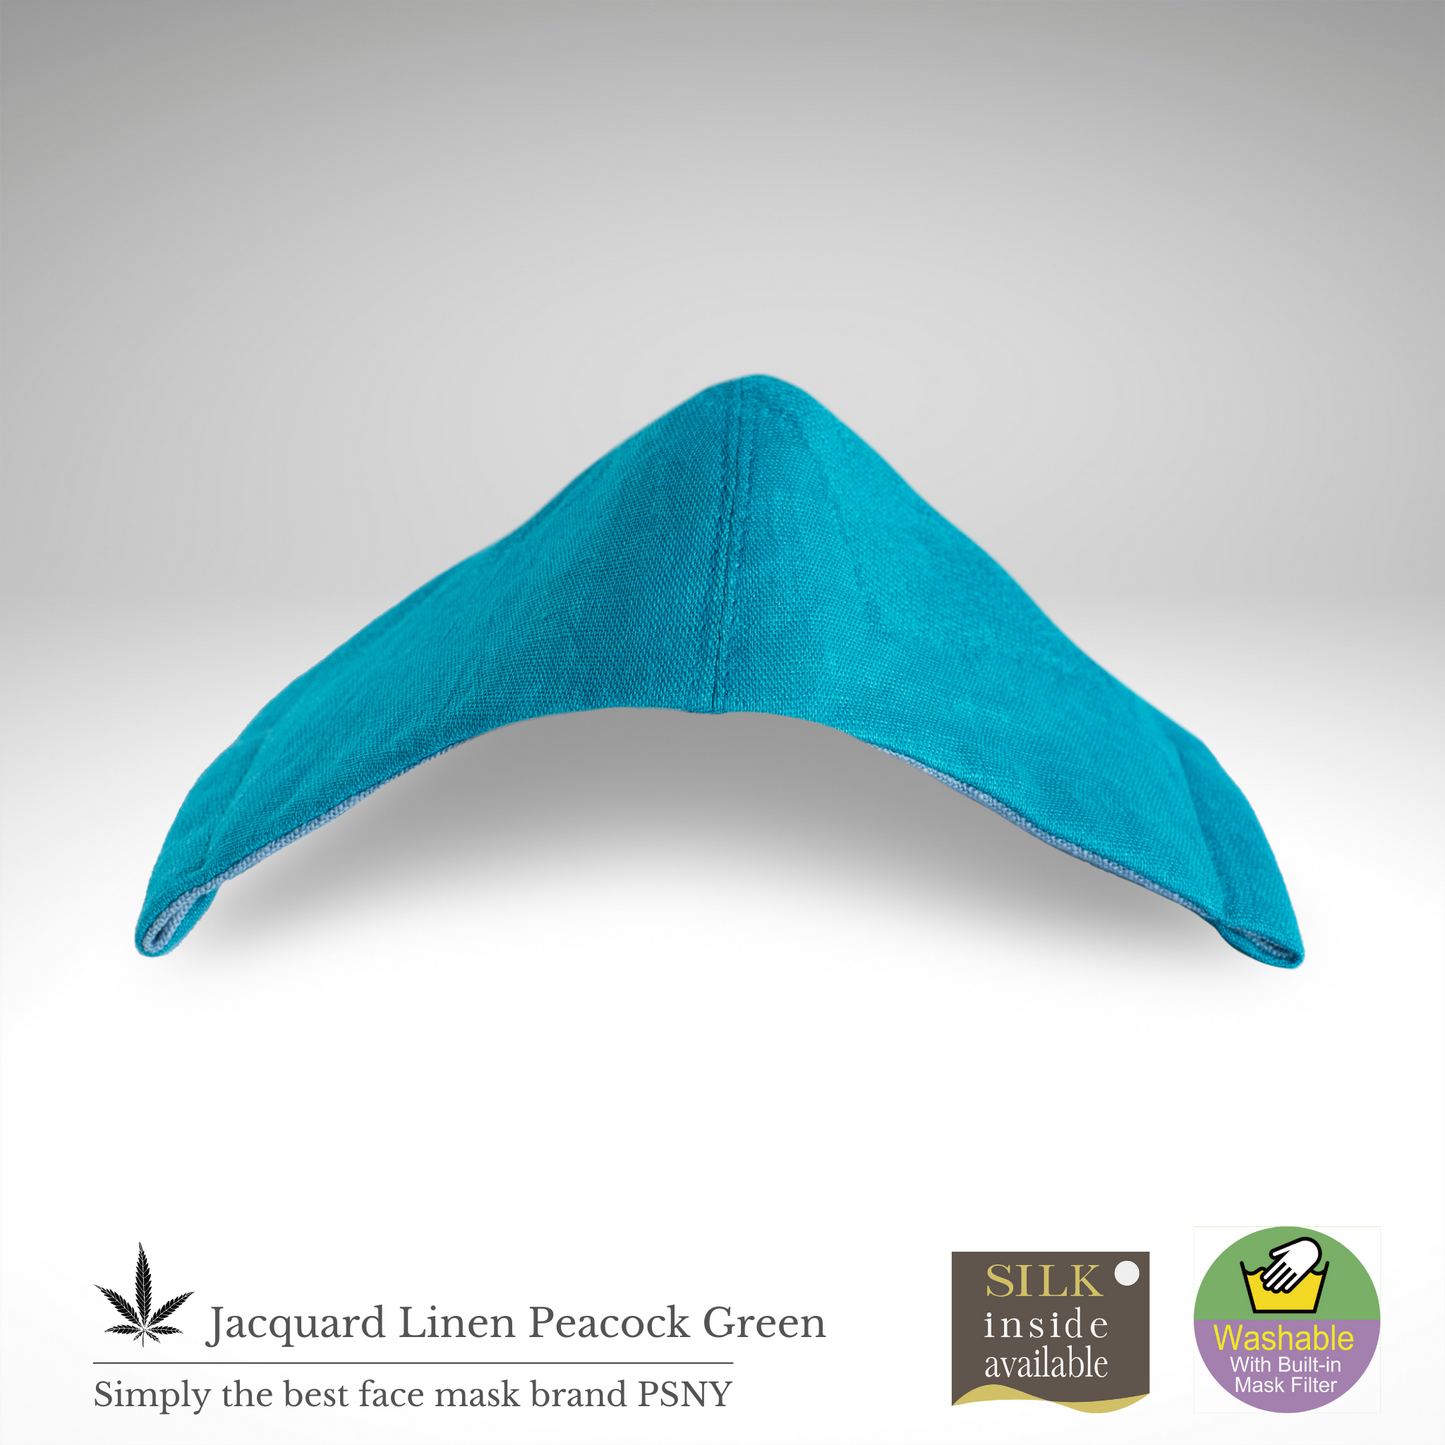 PSNY Jacquard Linen/Peacock Green 3D Adult Mask with Nonwoven Filter JL12